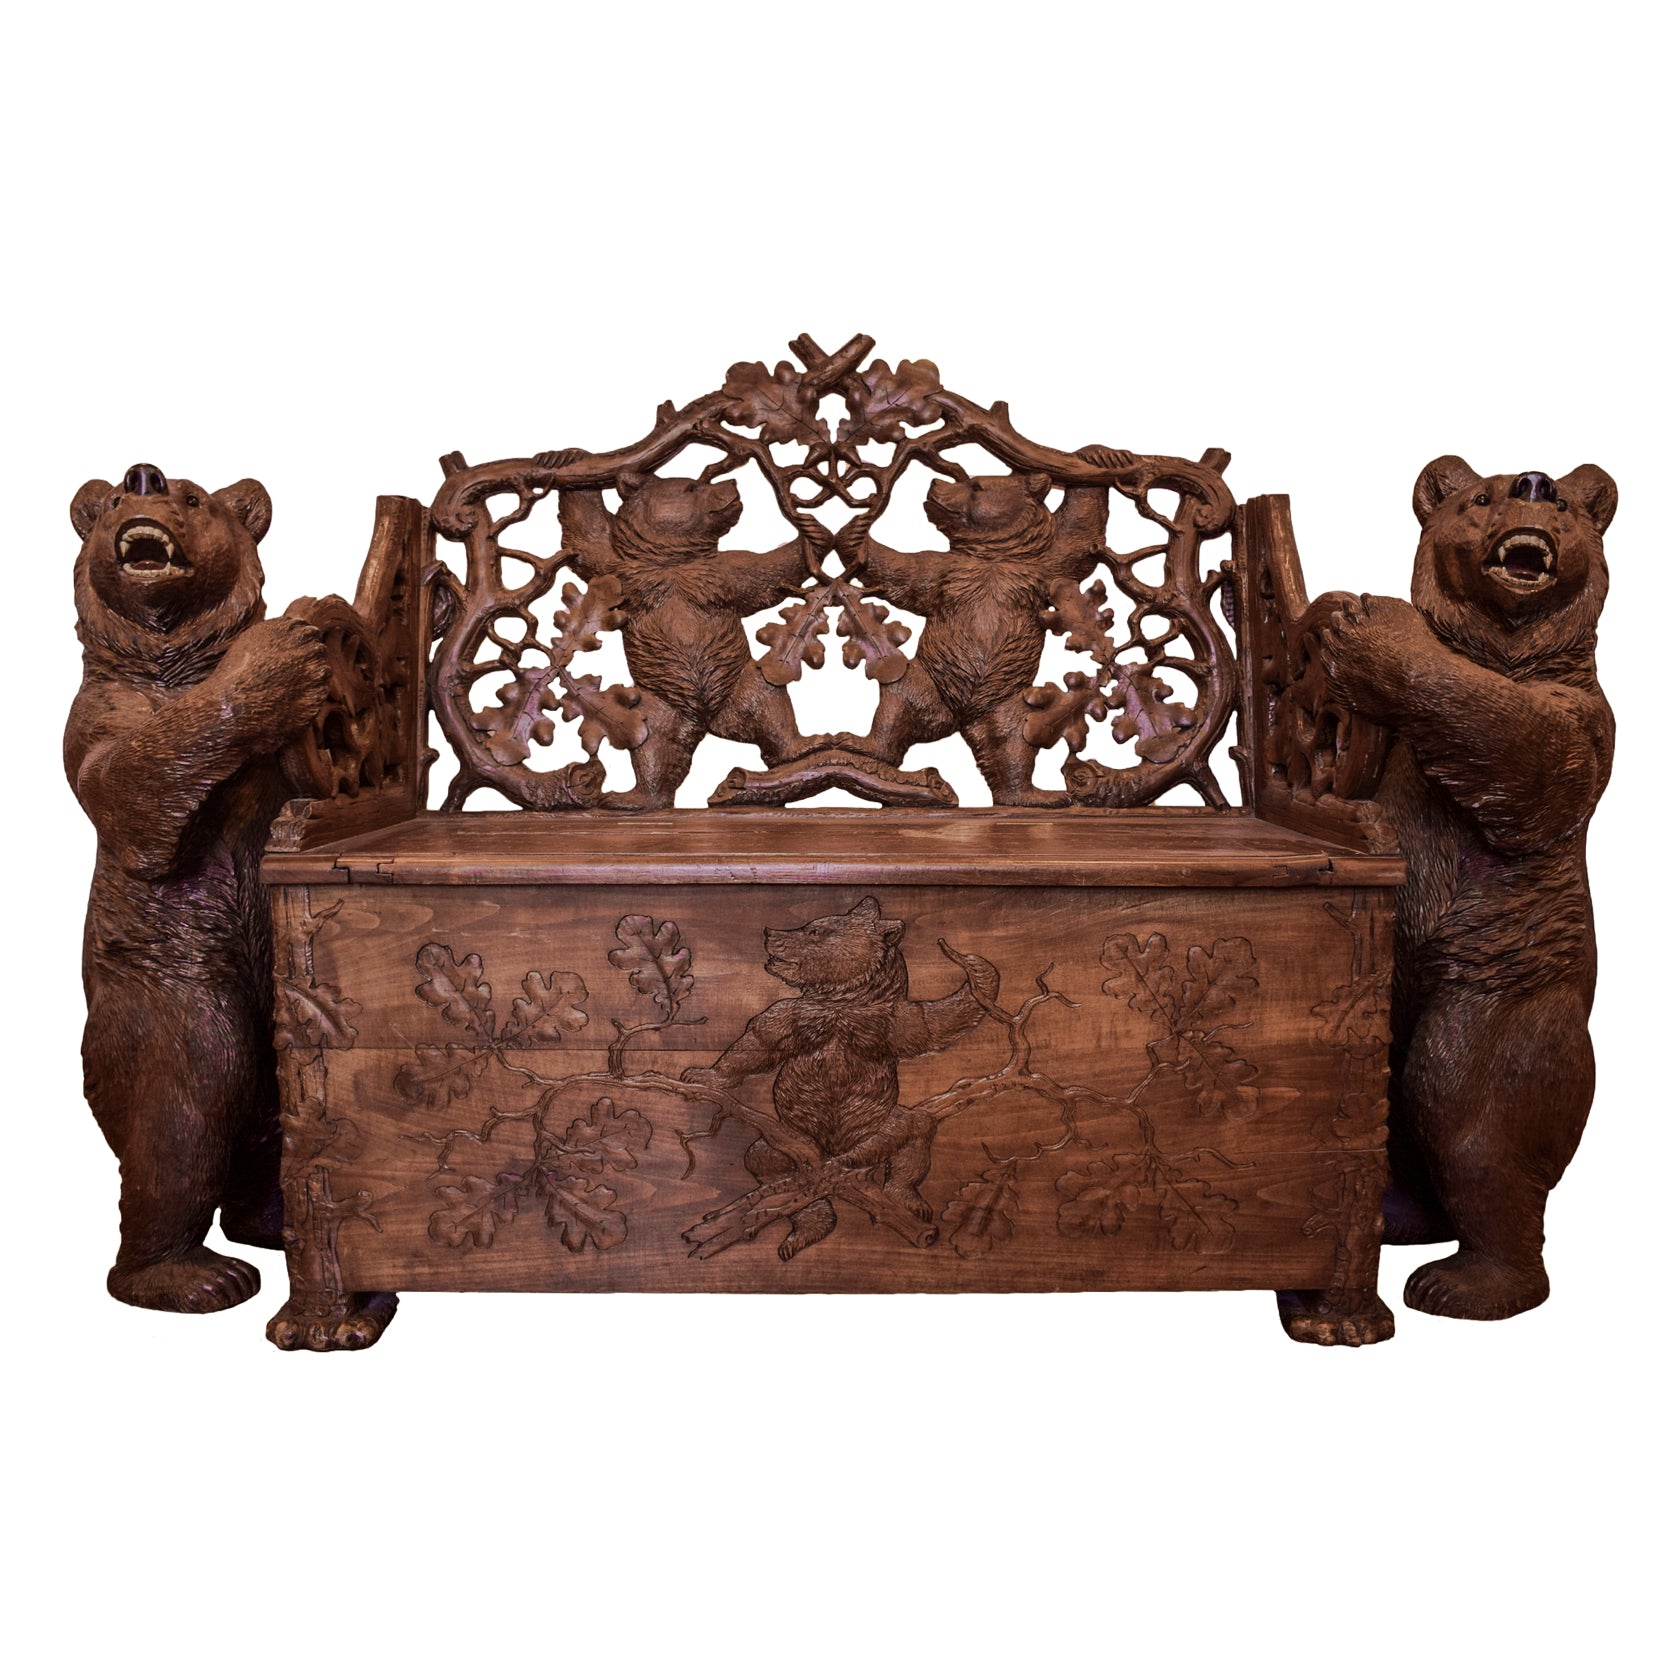 Five Bear Bench, Furnishings, Black Forest, Bench